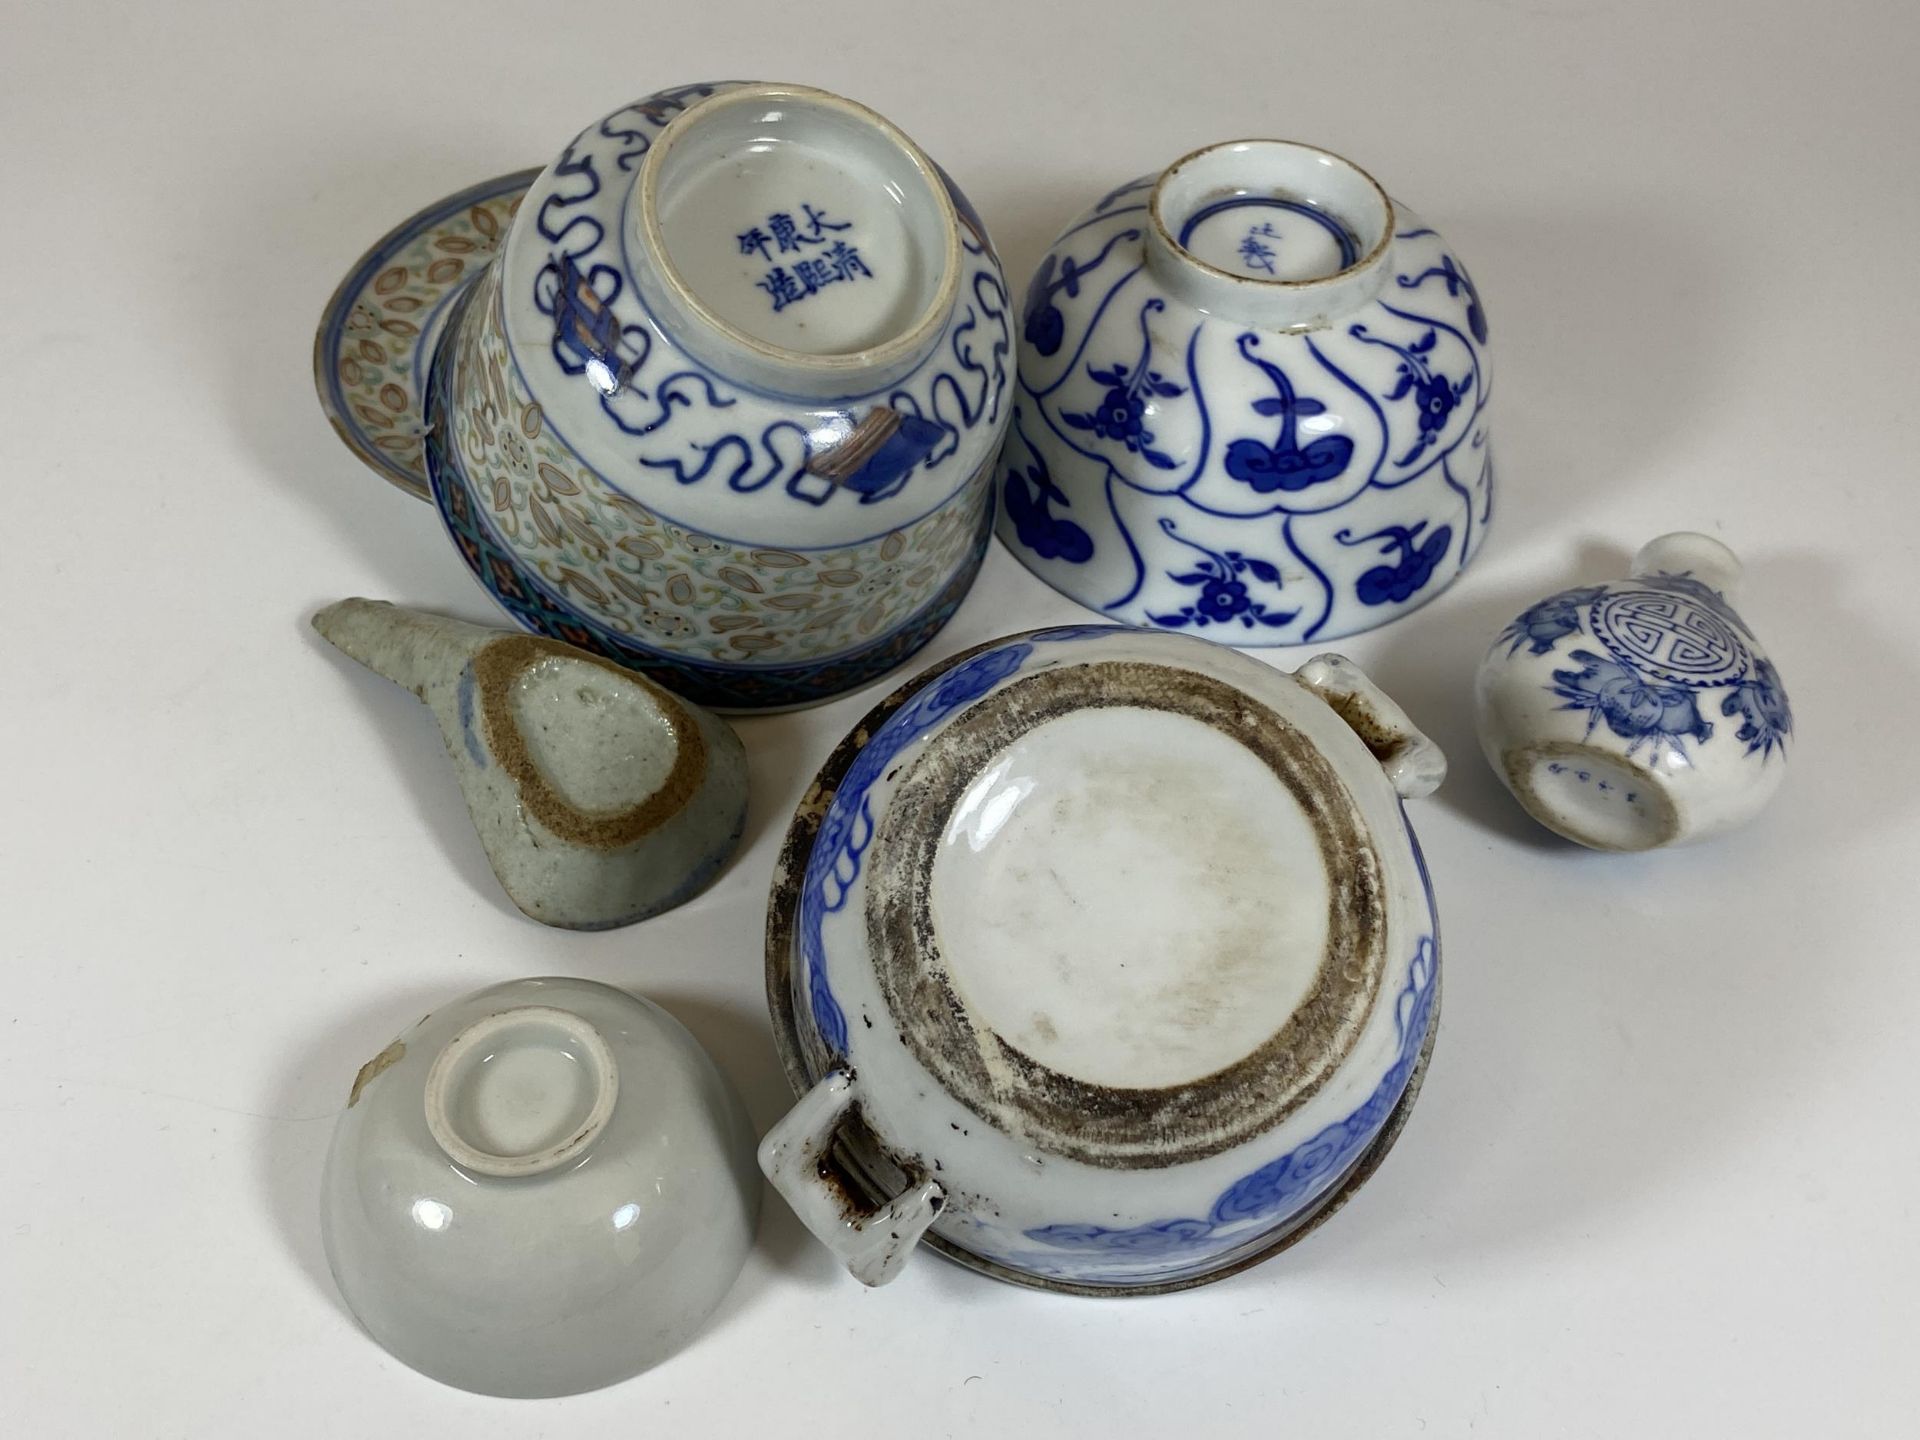 A COLLECTION OF CHINESE BLUE AND WHITE PORCELAIN ITEMS, MING STYLE SPOON, RICE BOWL, LIDDED DRAGON - Image 4 of 4